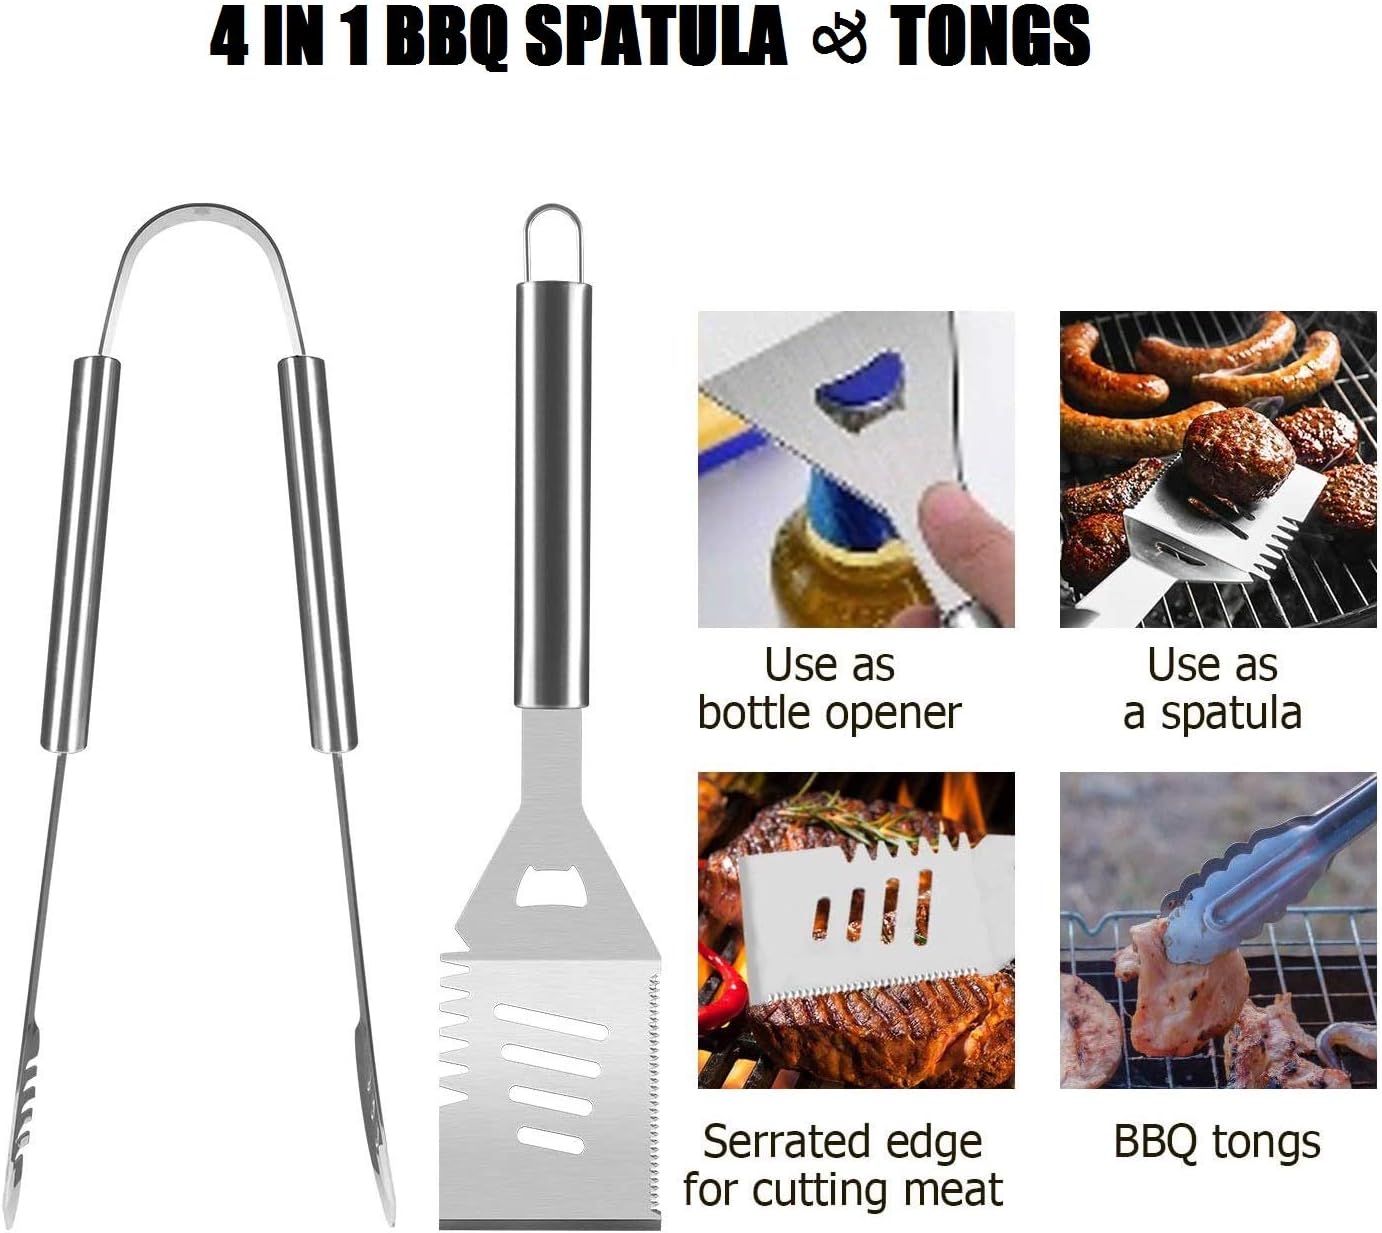 18 Pcs BBQ Griddle Tools Set, Flat Top Barbeque Grill Cooking Kit